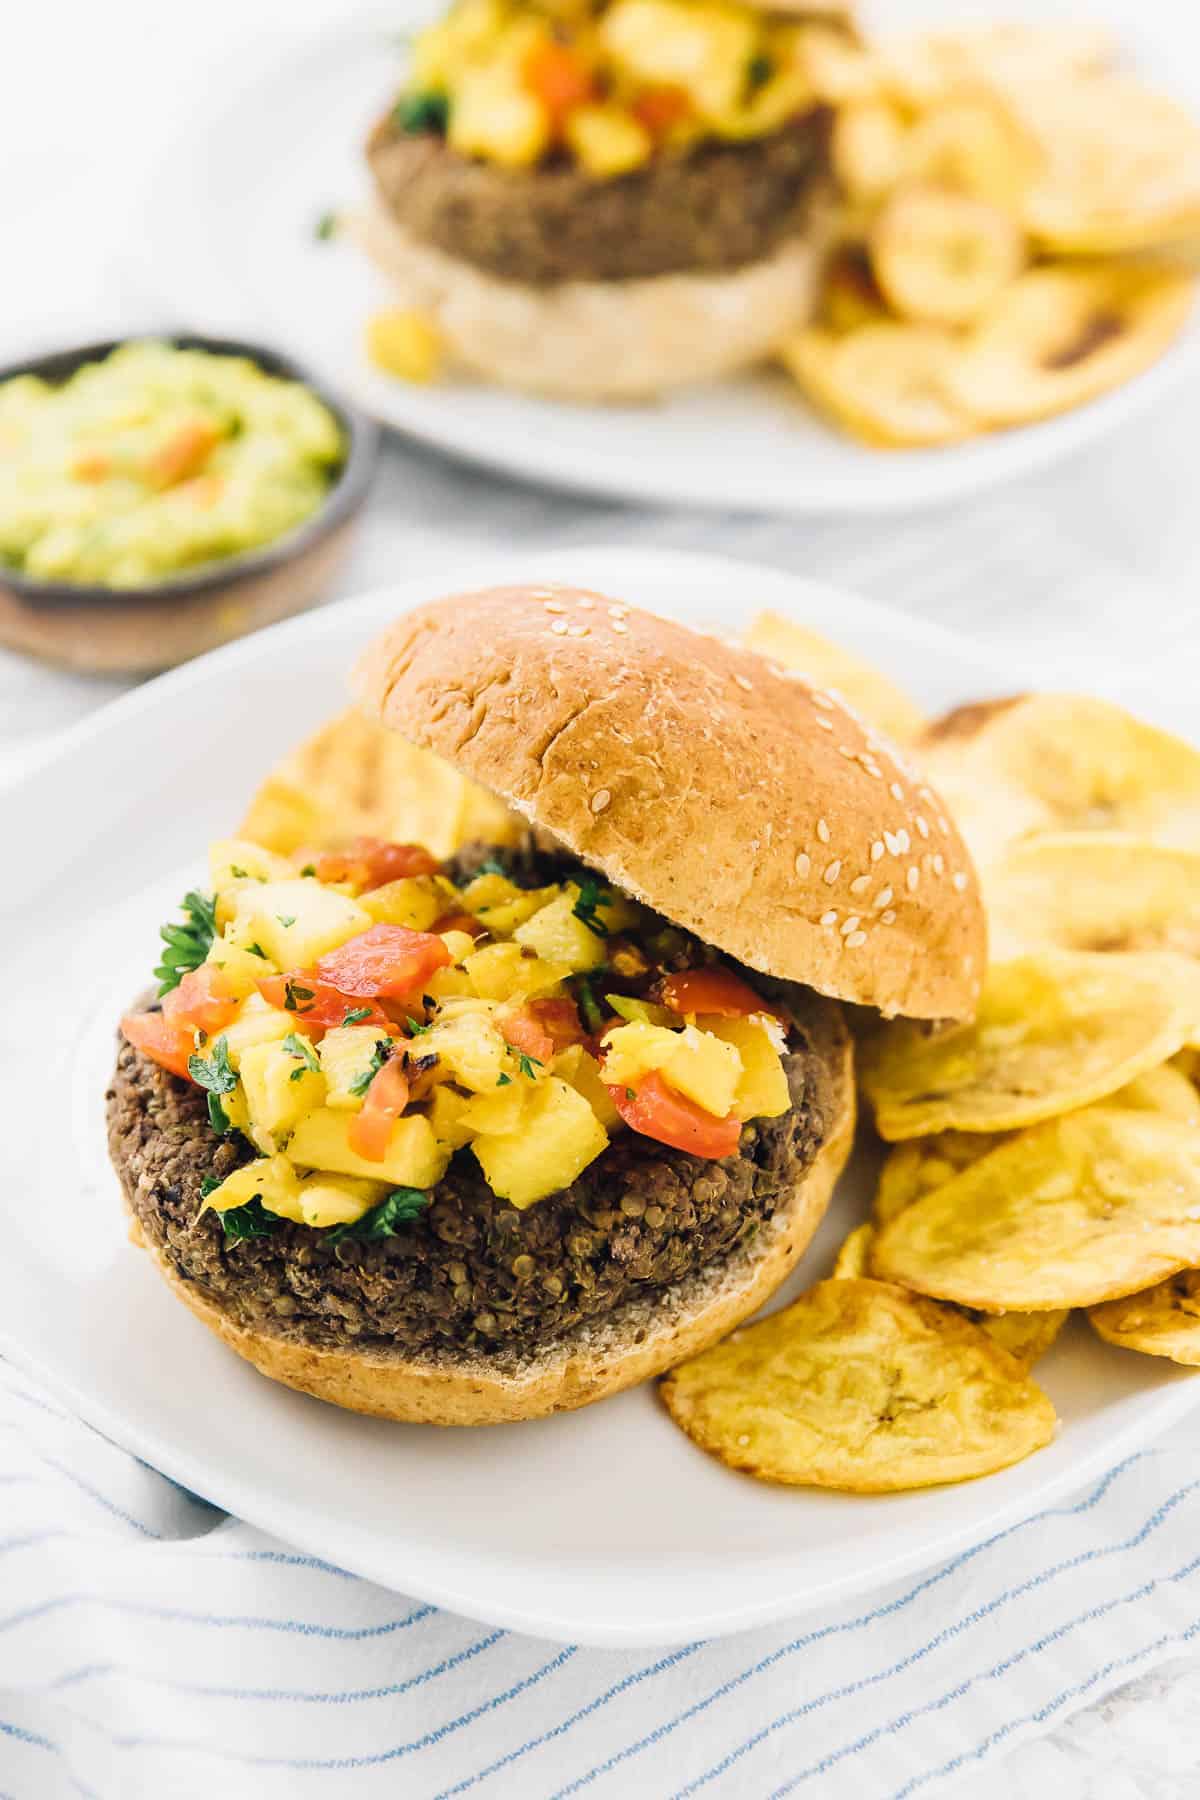 A burger with pineapple salsa and chips on the side. 